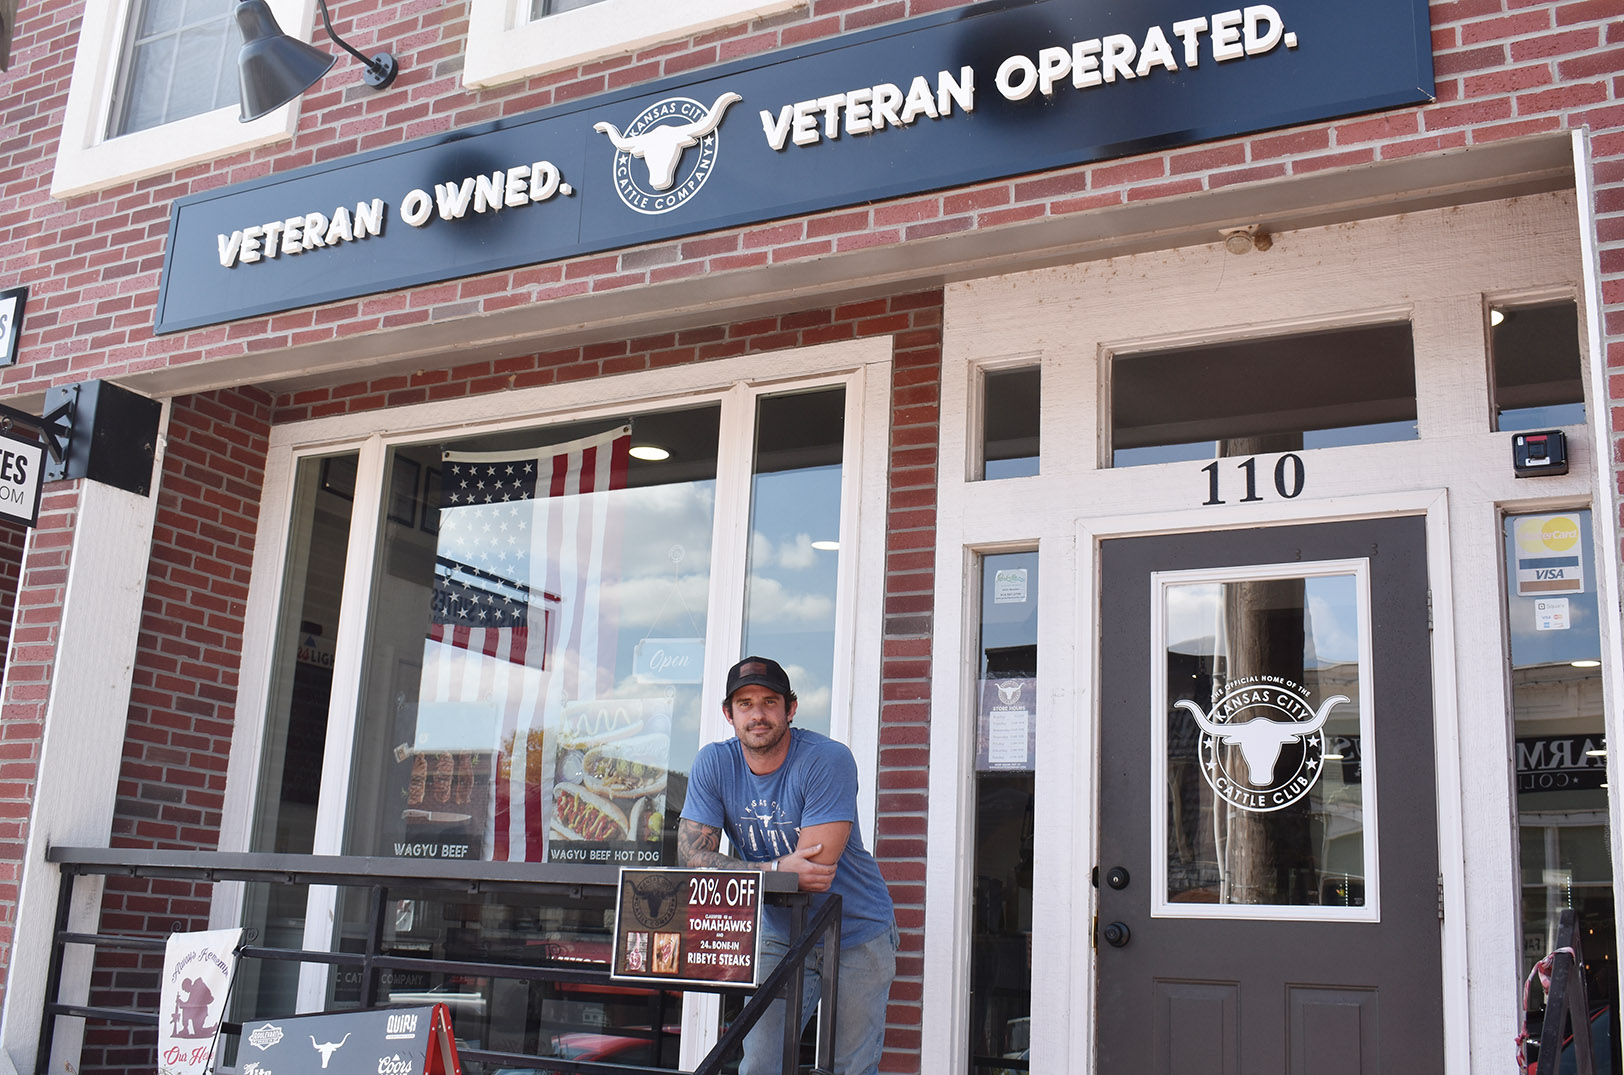 KC Cattle Company steaks its reputation on wagyu hot dogs; Why this rural MO business enlists veterans on its new mission